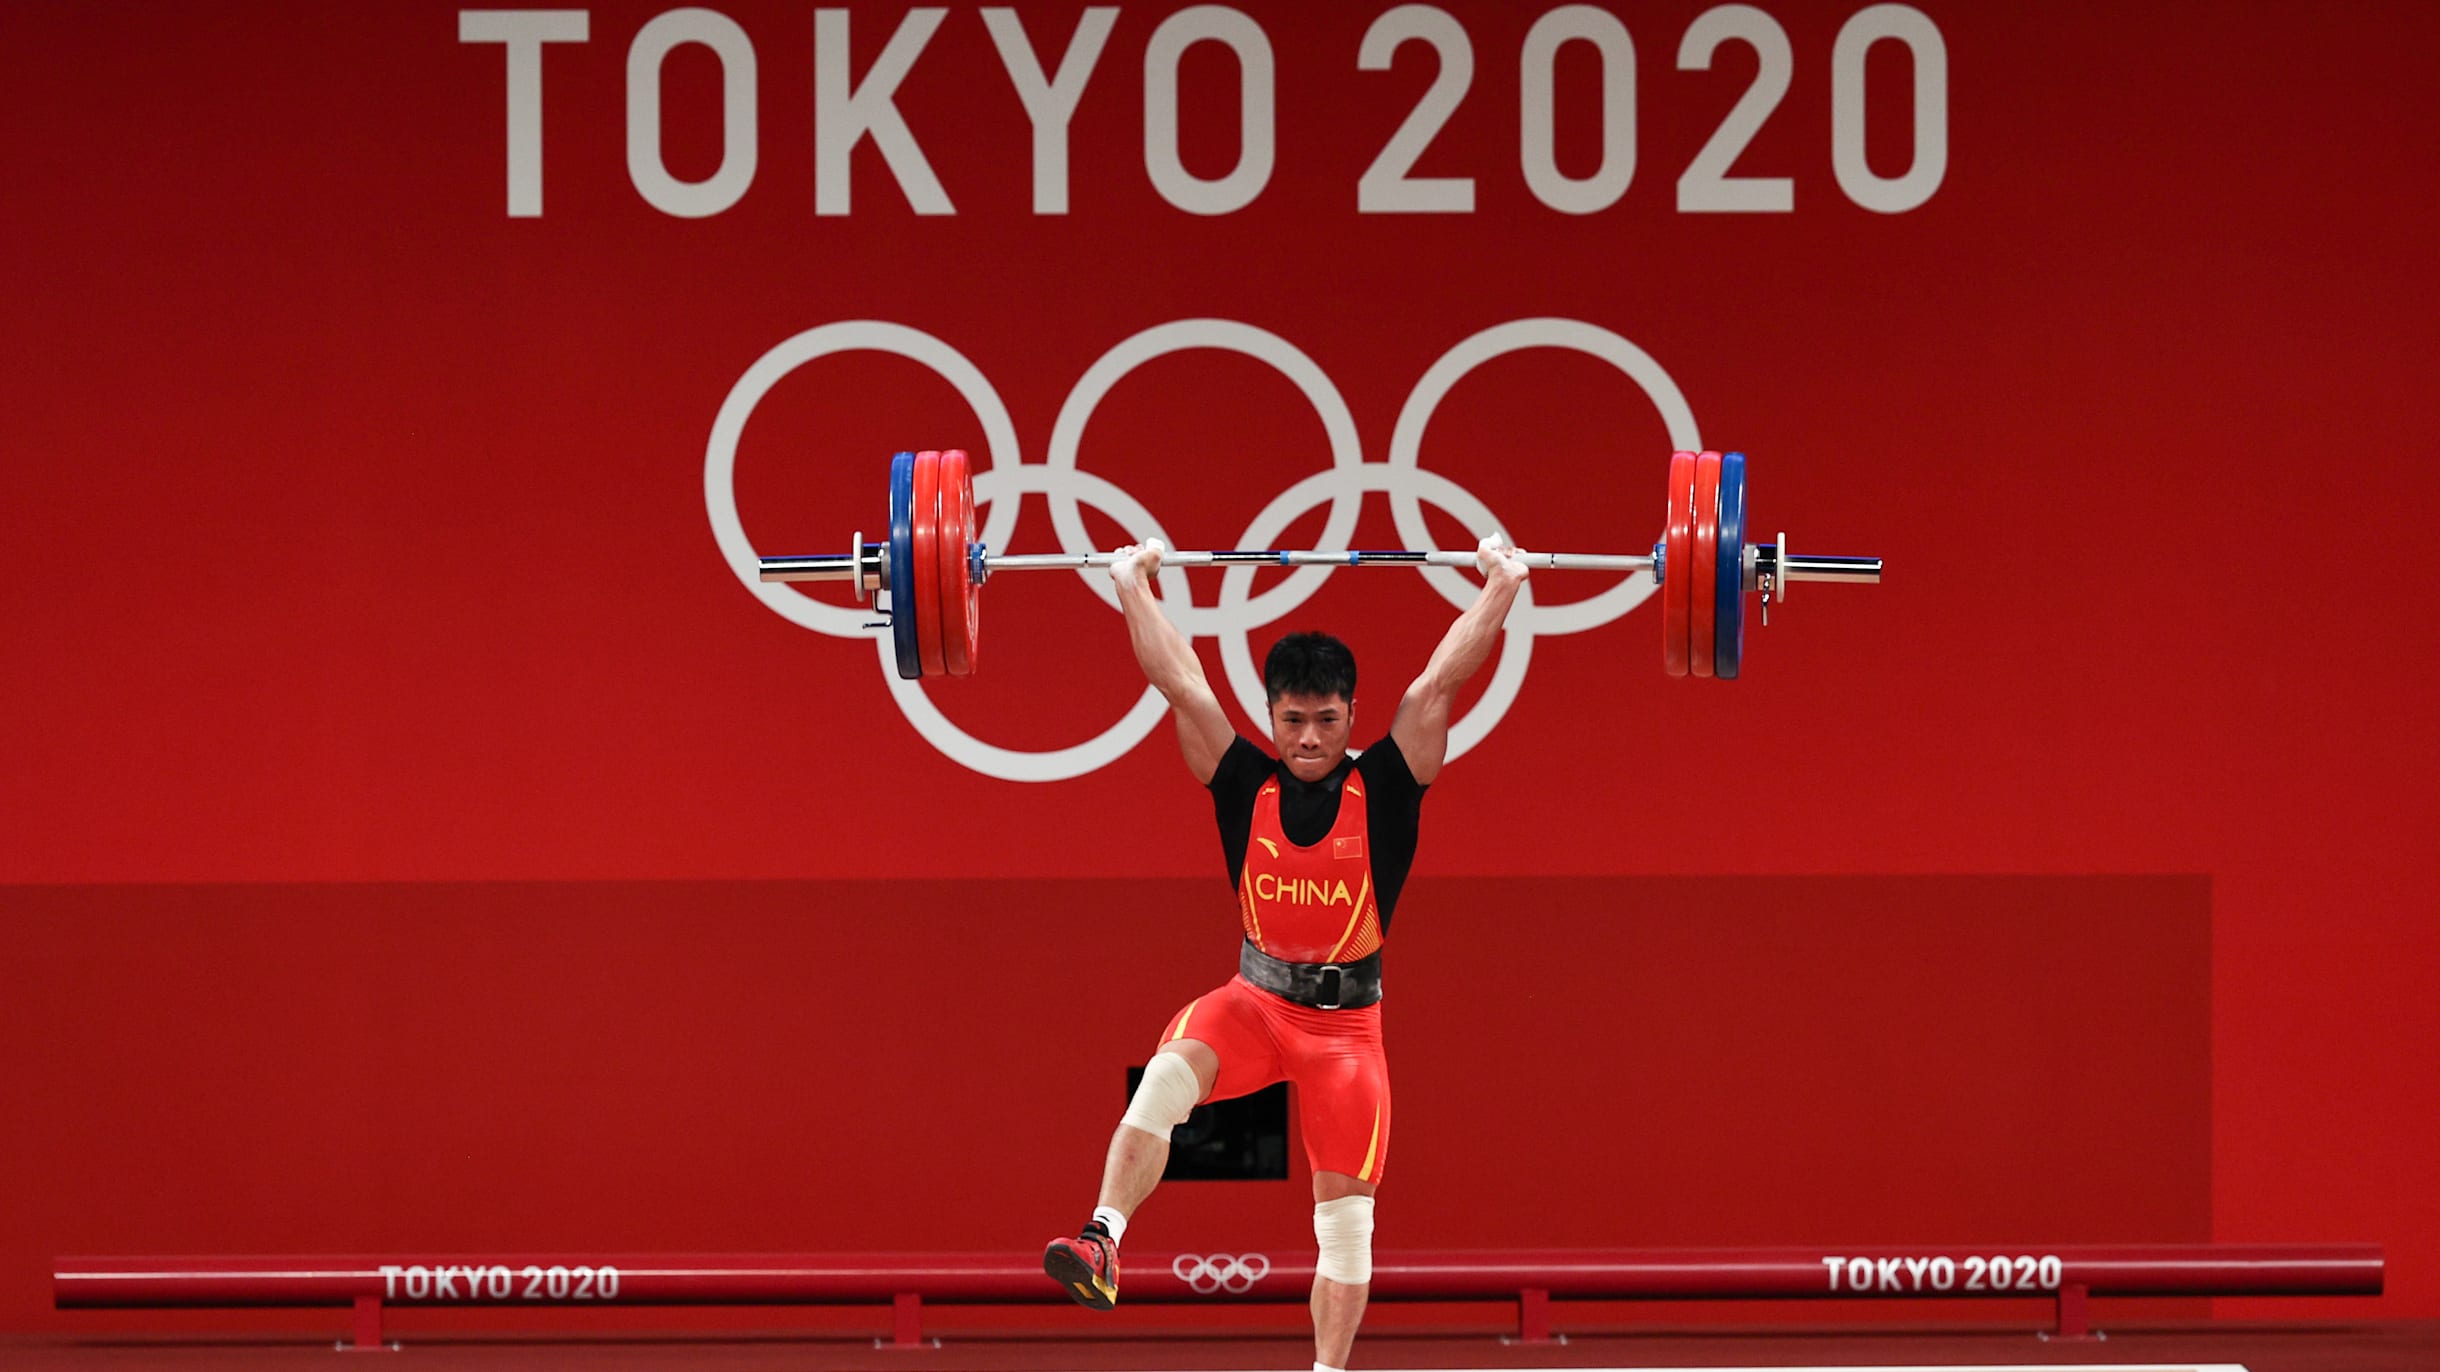 Paris 2024 Weight categories for the Olympic weightlifting competition pic